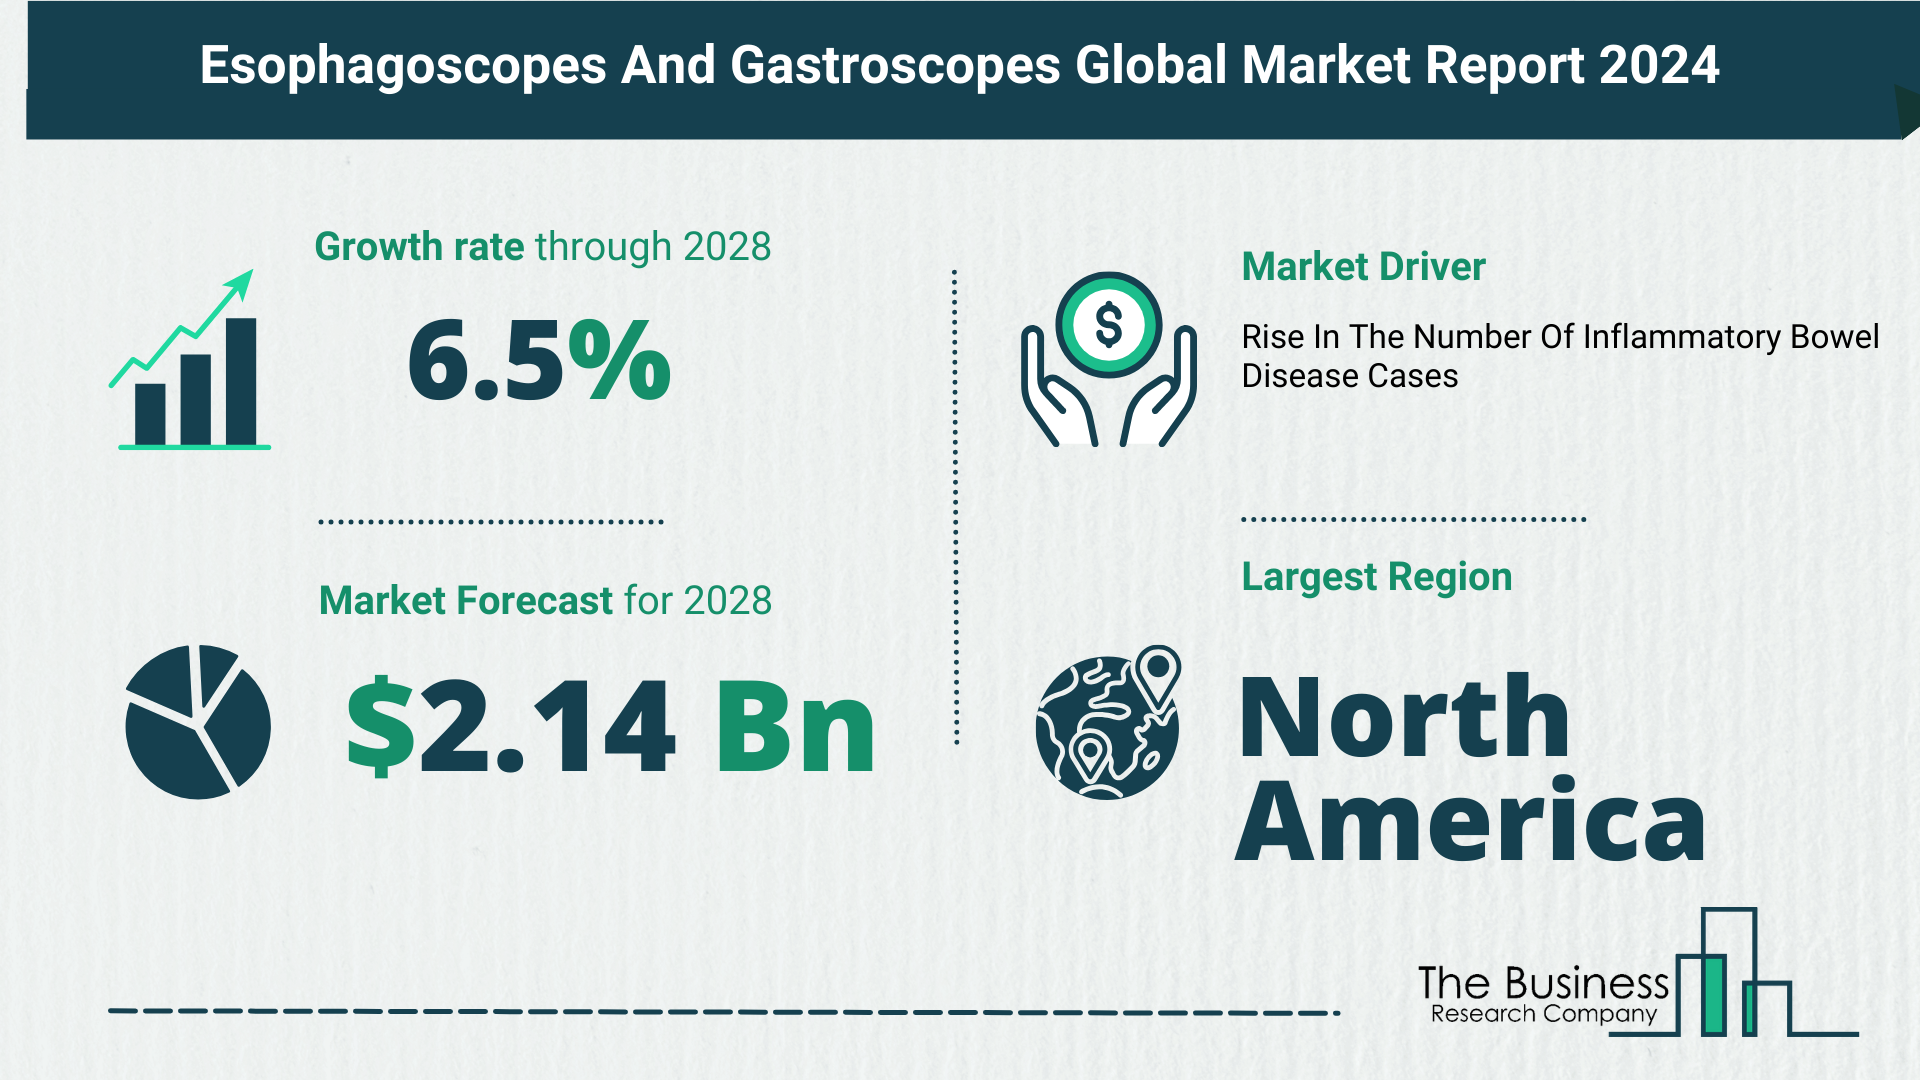 Esophagoscopes And Gastroscopes Market Report 2024: Market Size, Drivers, And Trends